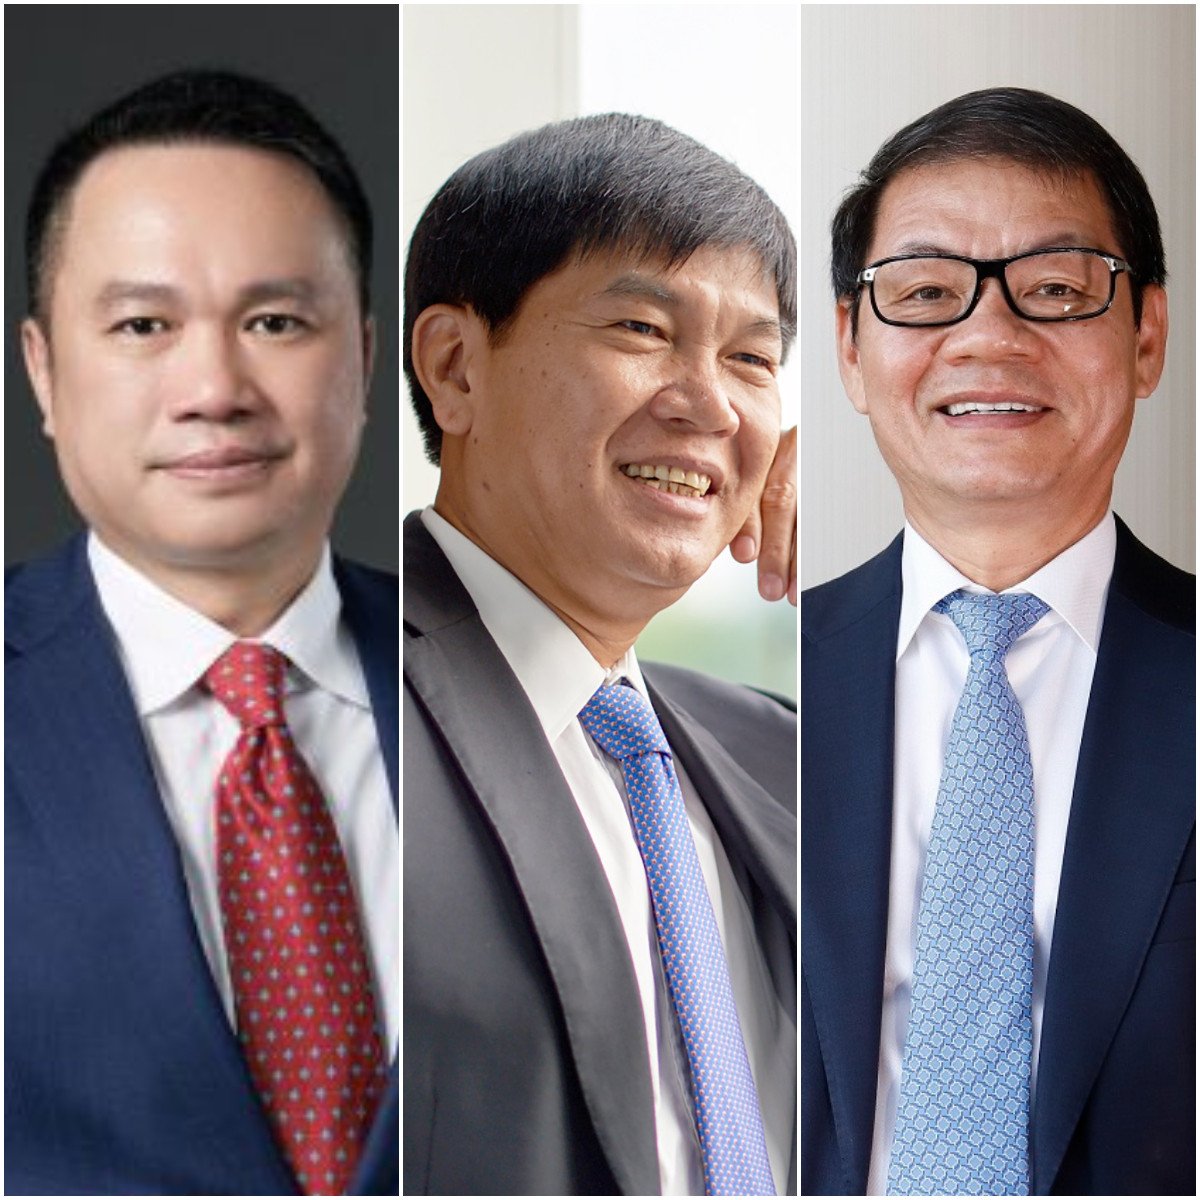 From left: co-founder of Masan Group, Ho Hung Anh;  chairman and founder of Hoa Phat Corporation, Tran Dinh Long; Thaco founder and chairman, Tran Ba Duong. Photos: Handout